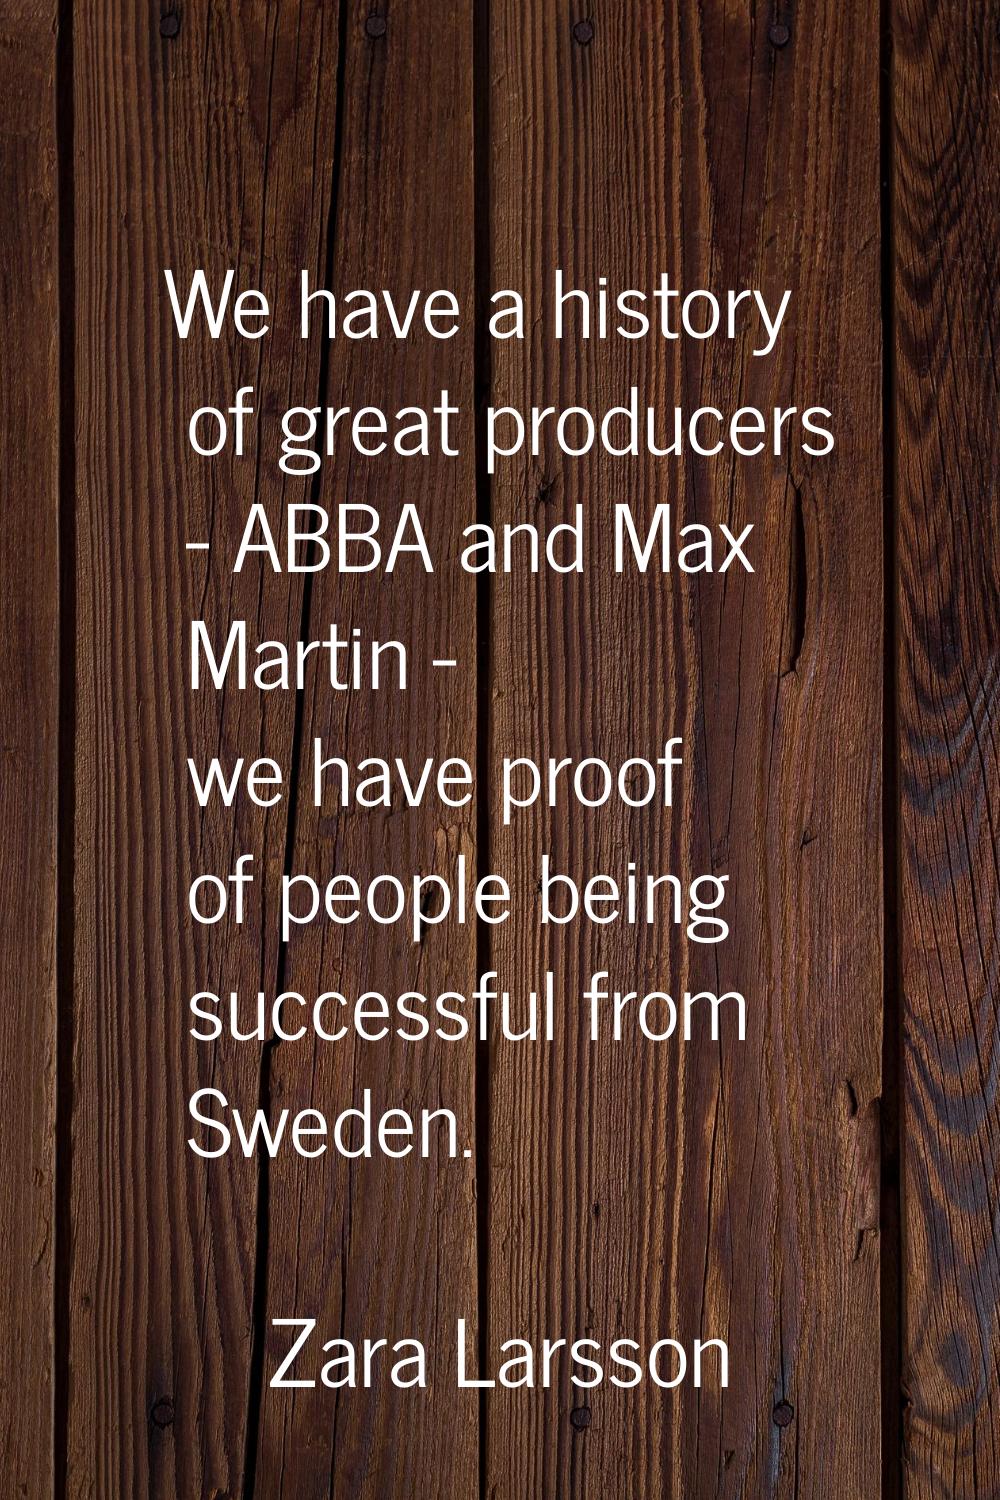 We have a history of great producers - ABBA and Max Martin - we have proof of people being successf